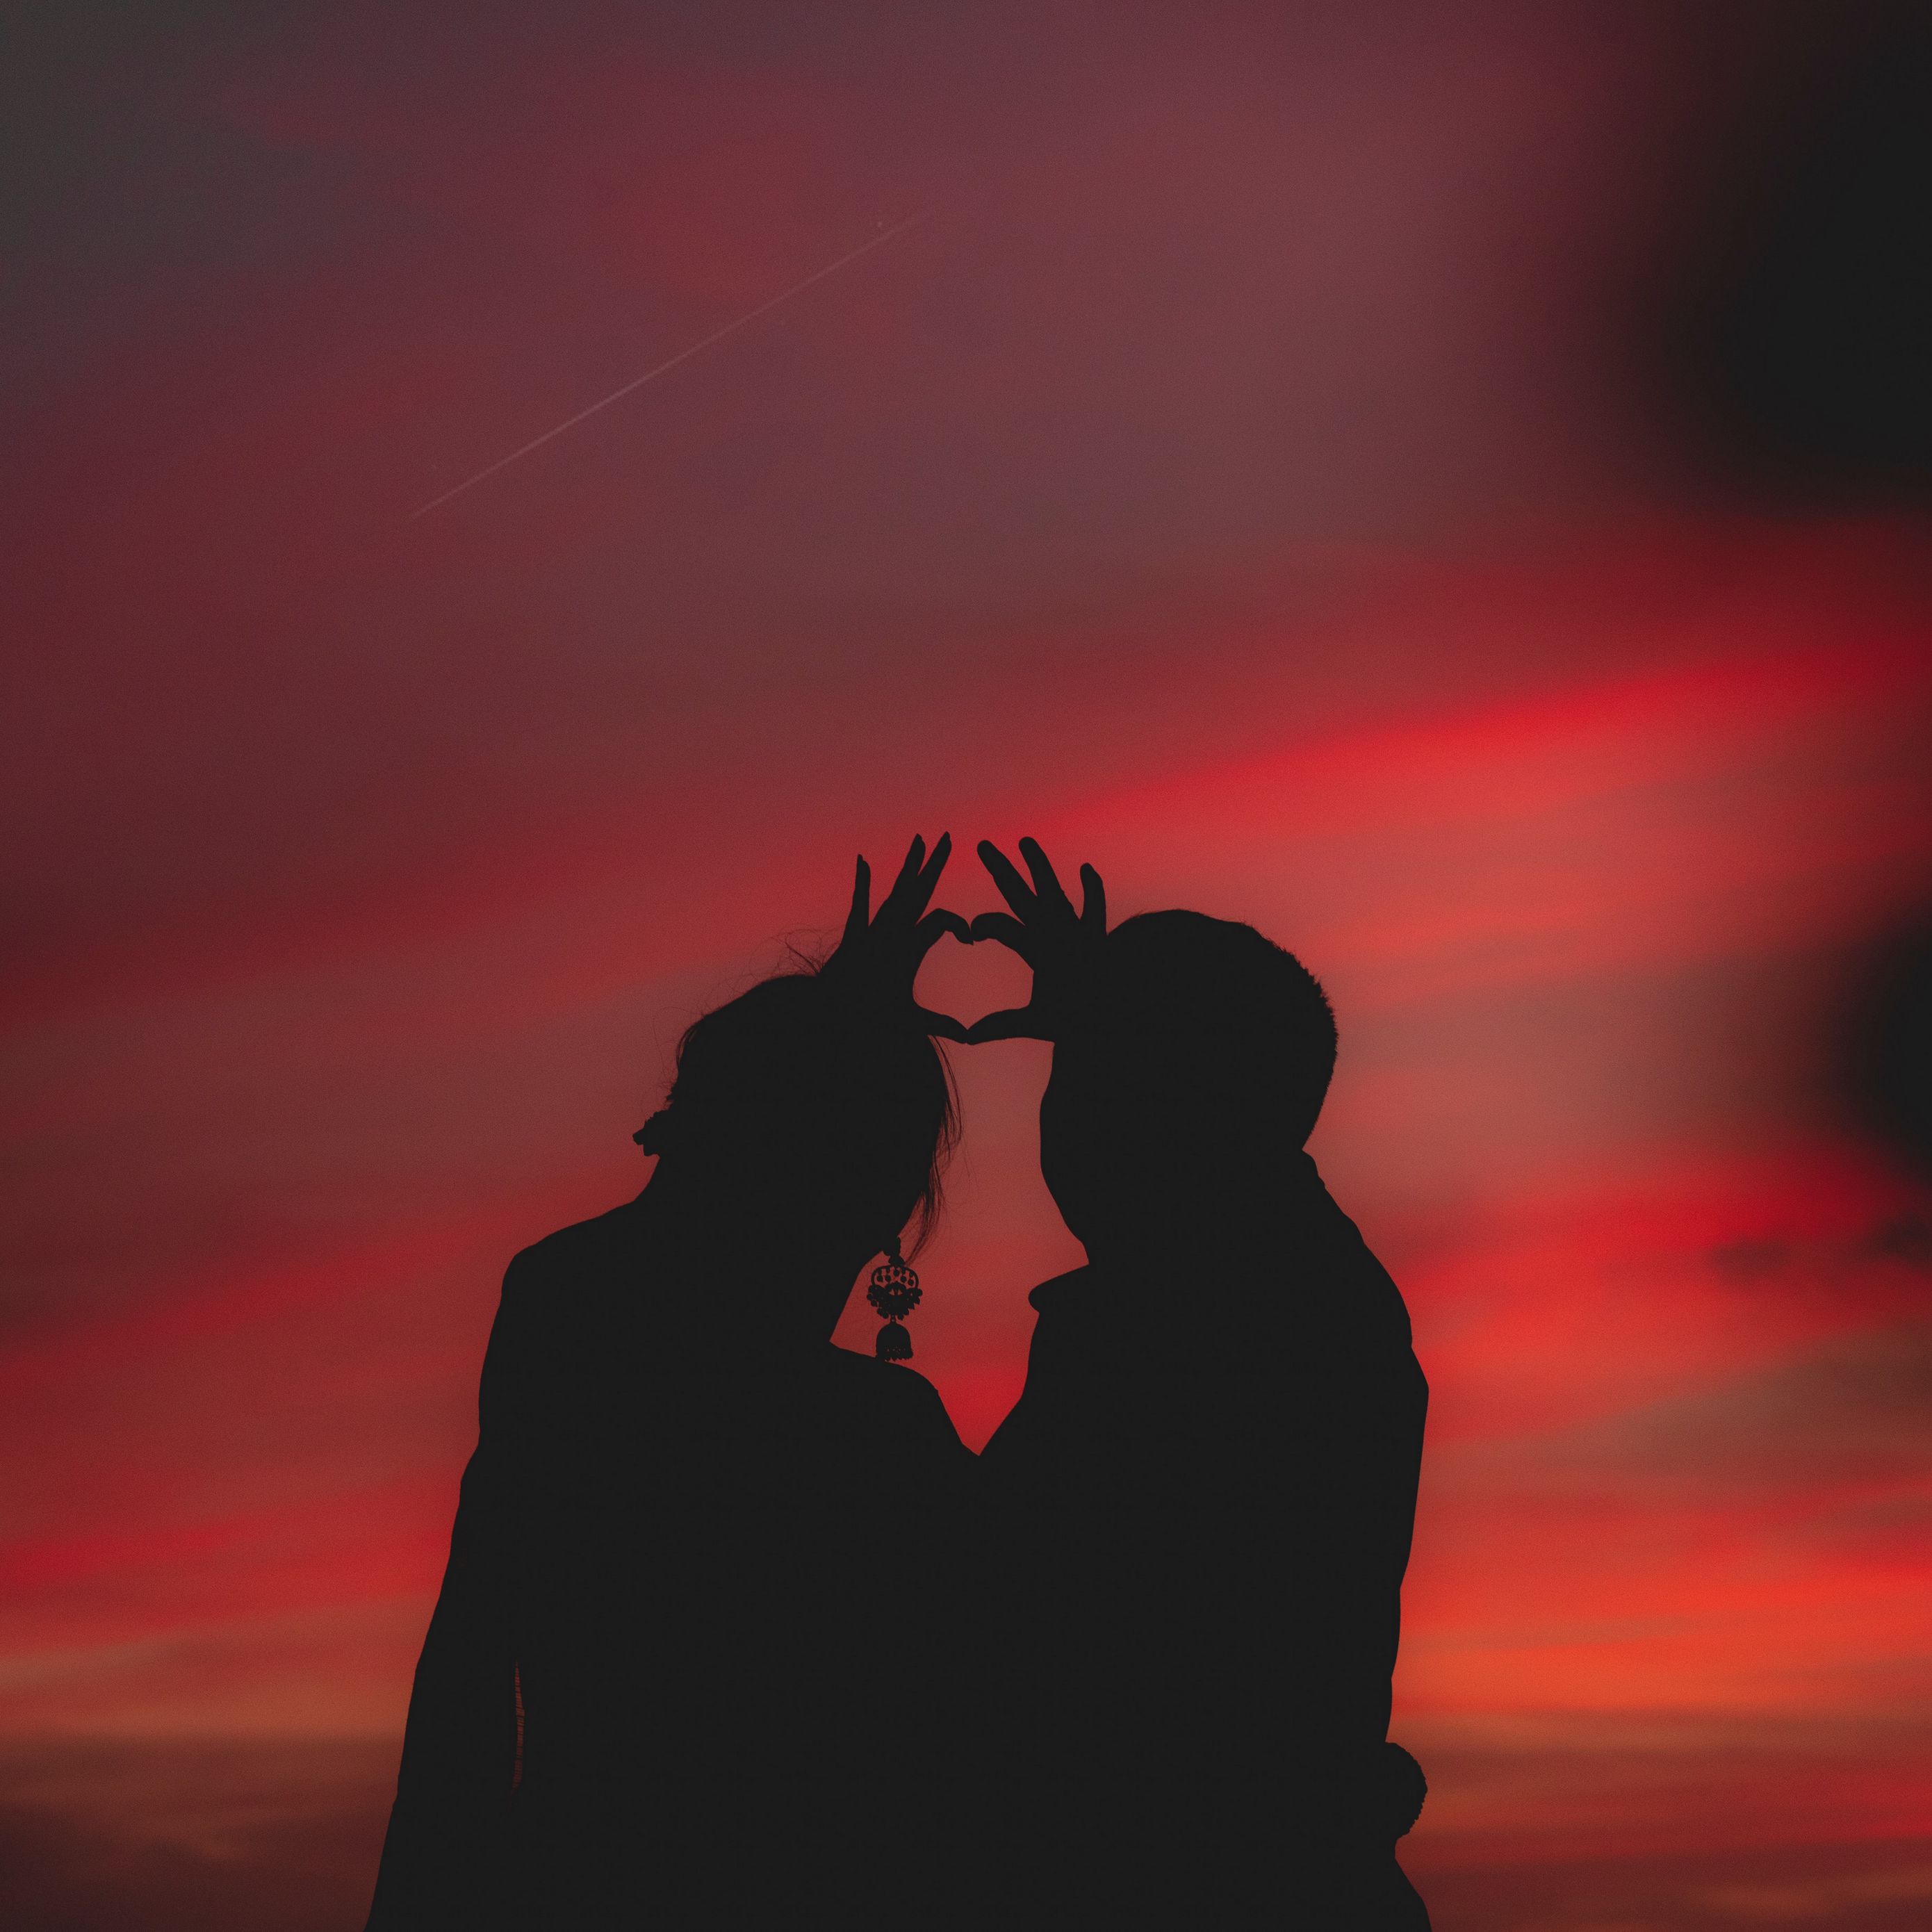 Download wallpaper 2780x2780 couple, heart, silhouettes, hands, love ...